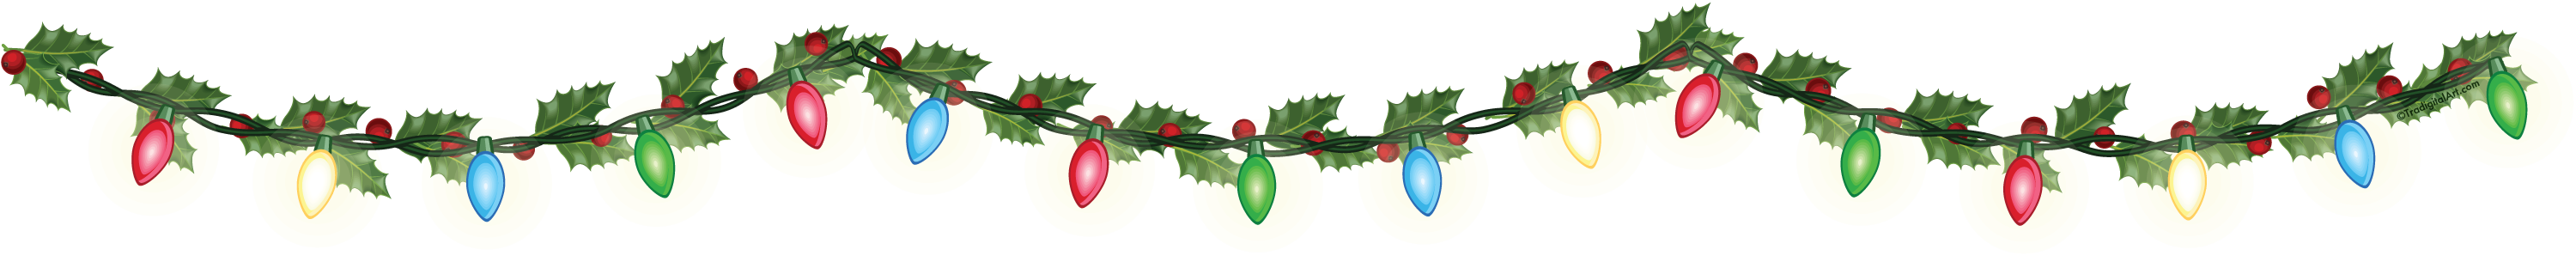 Free Christmas Lights PNG Transparent Images, Download Free Christmas